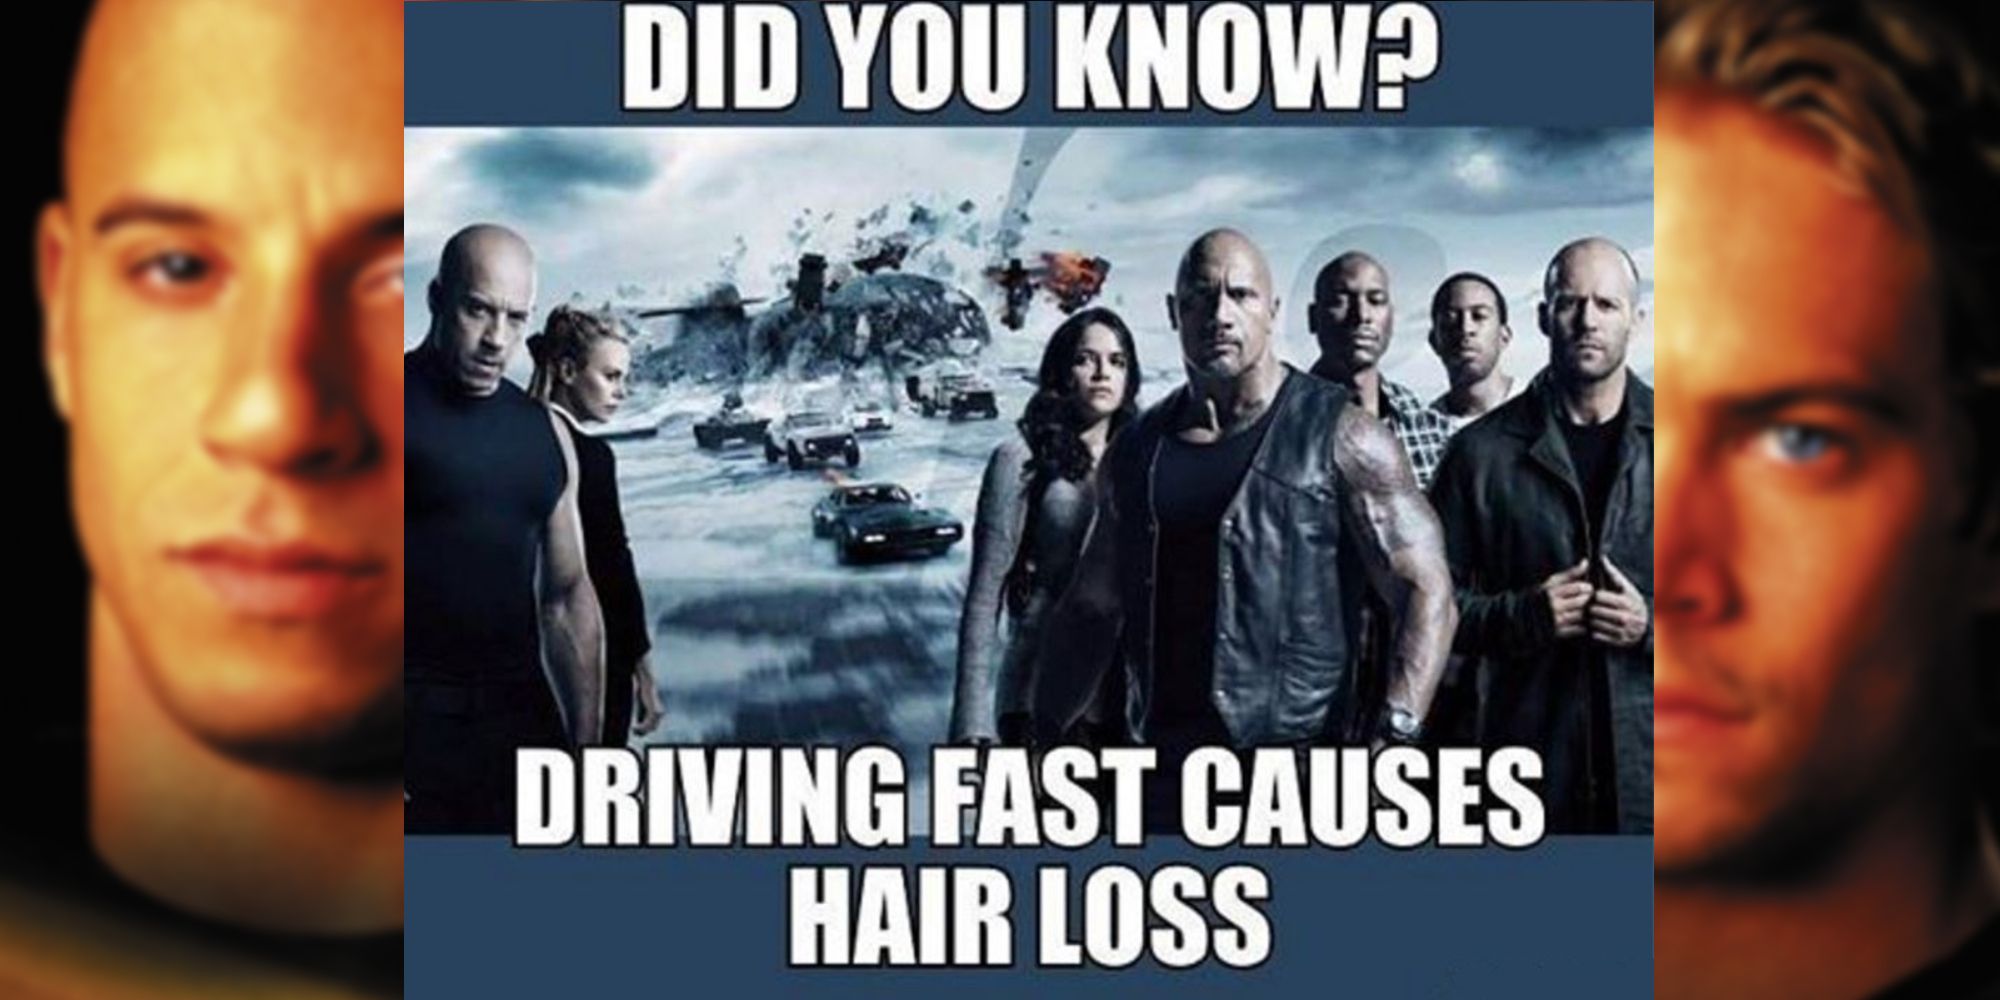 Driving Causes Hair loss Fast and Furious Meme.